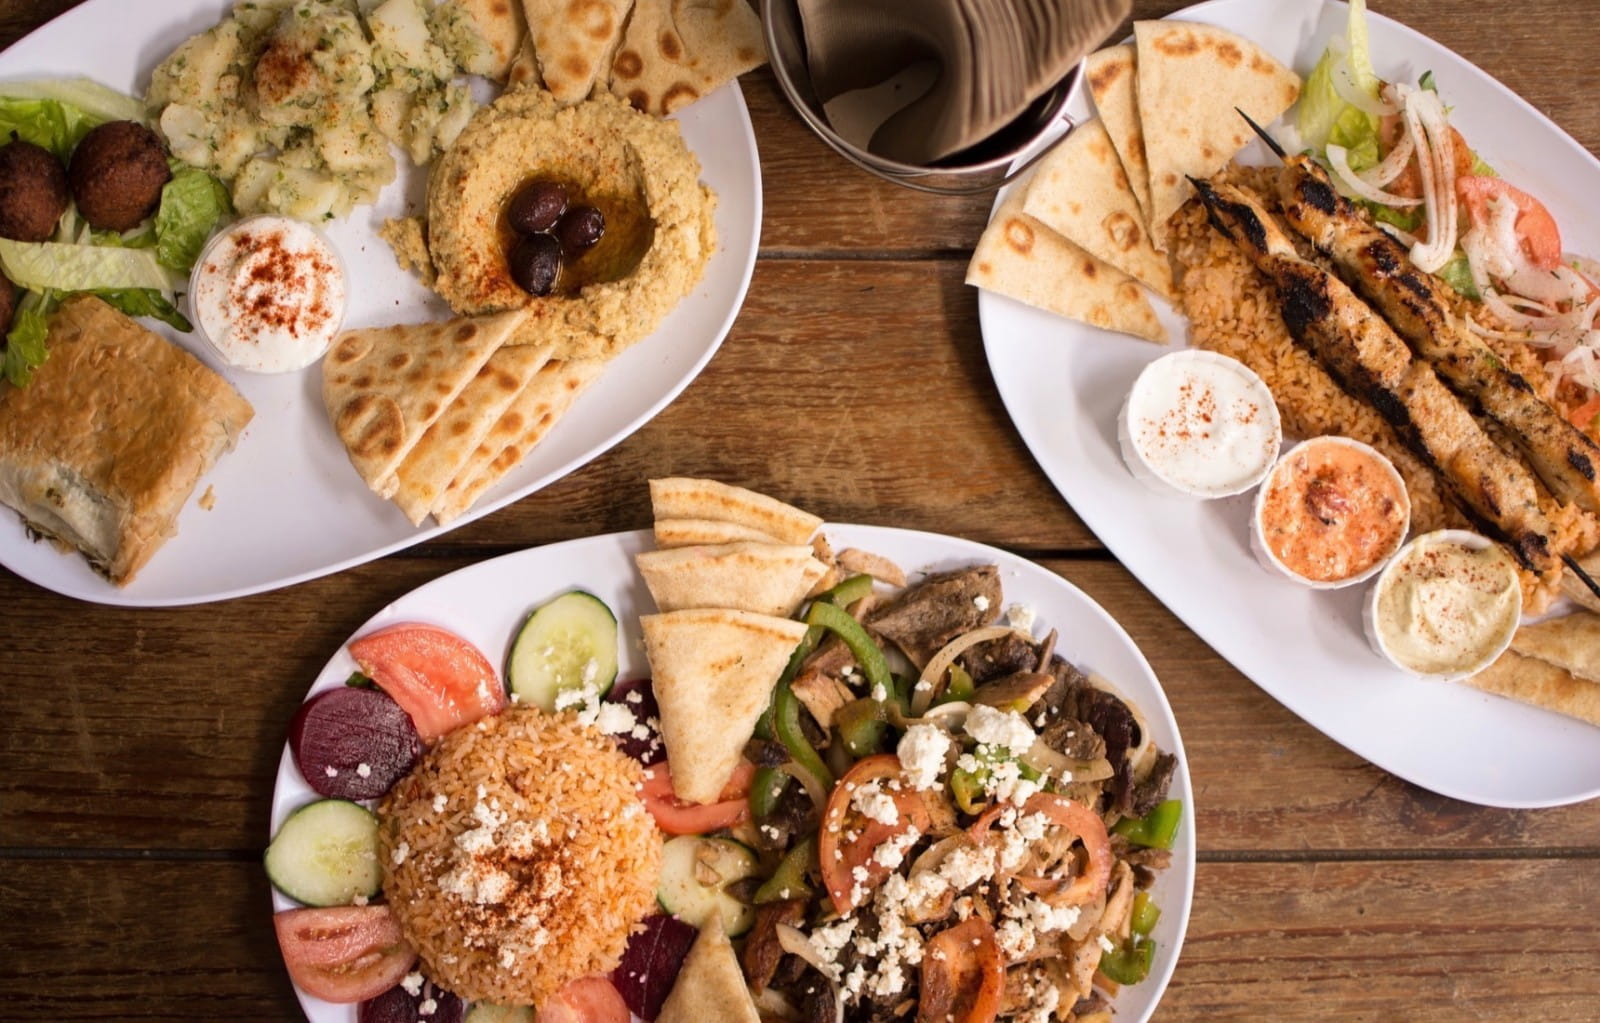 What to drink with Middle Eastern food?